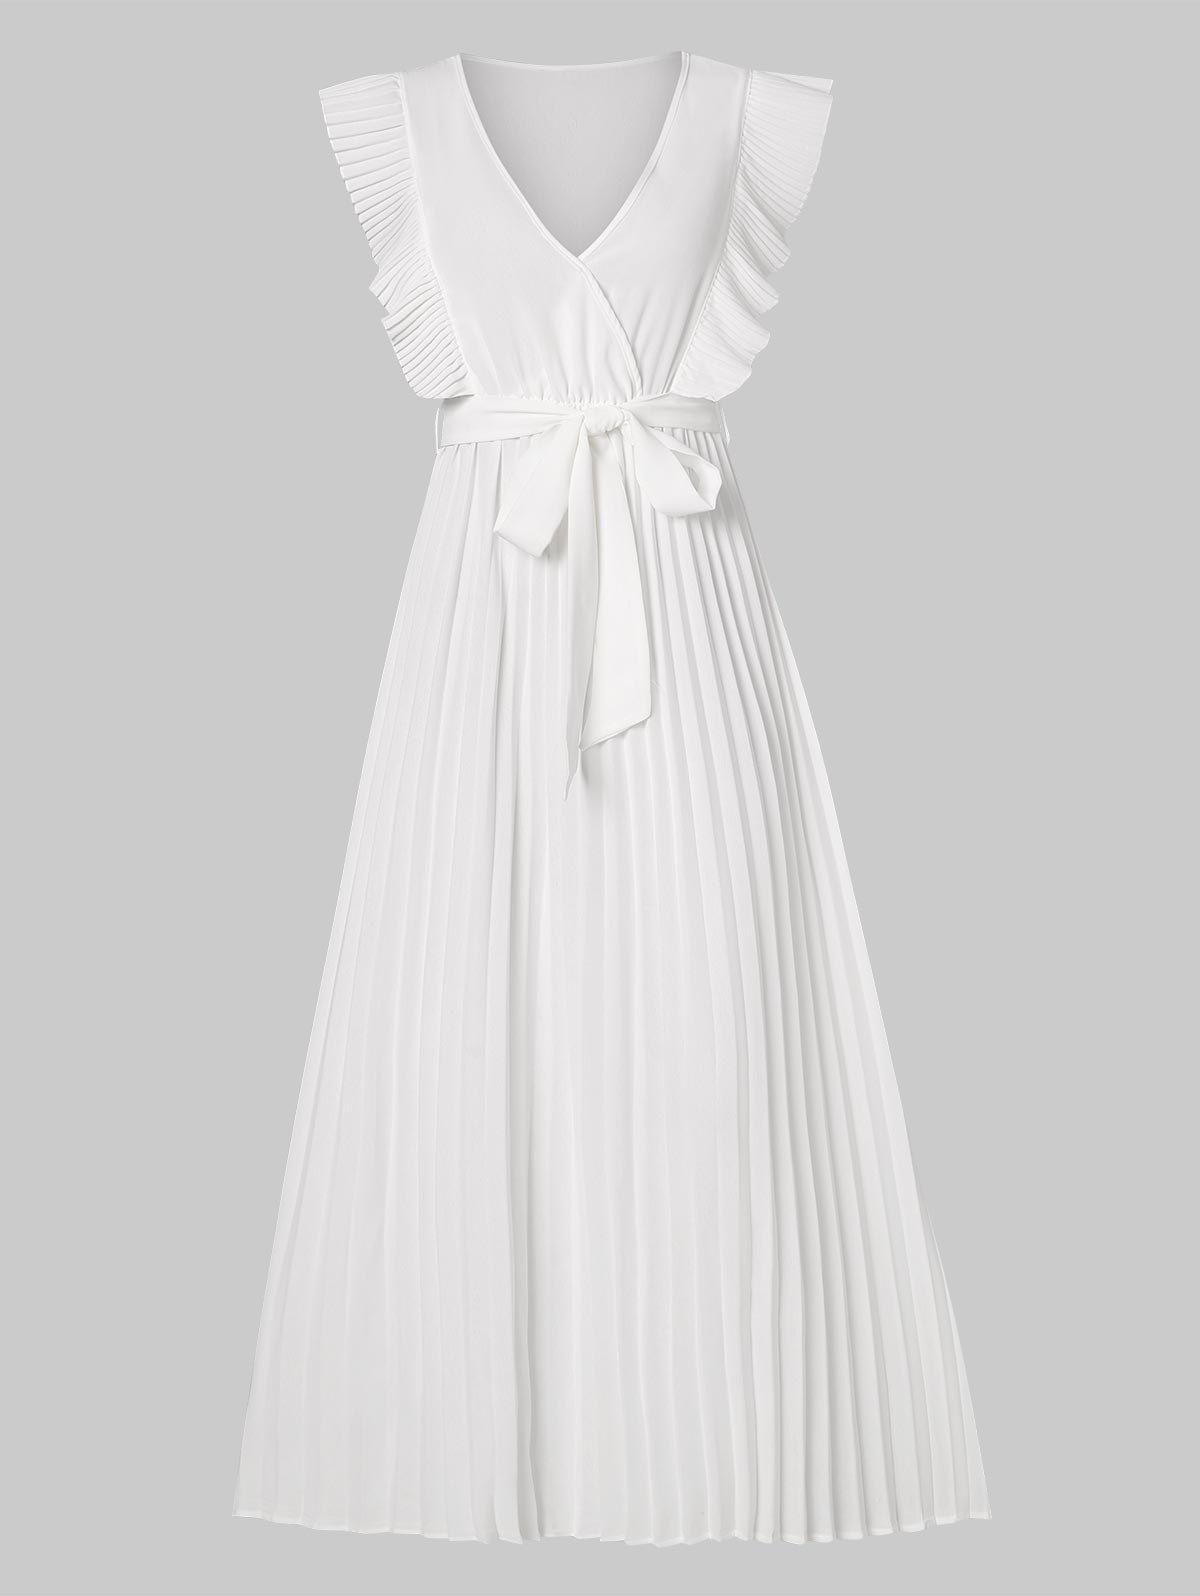 Vacation Surplice Pintuck Ruffle Belted A Line Pleated Dress - WHITE XXL